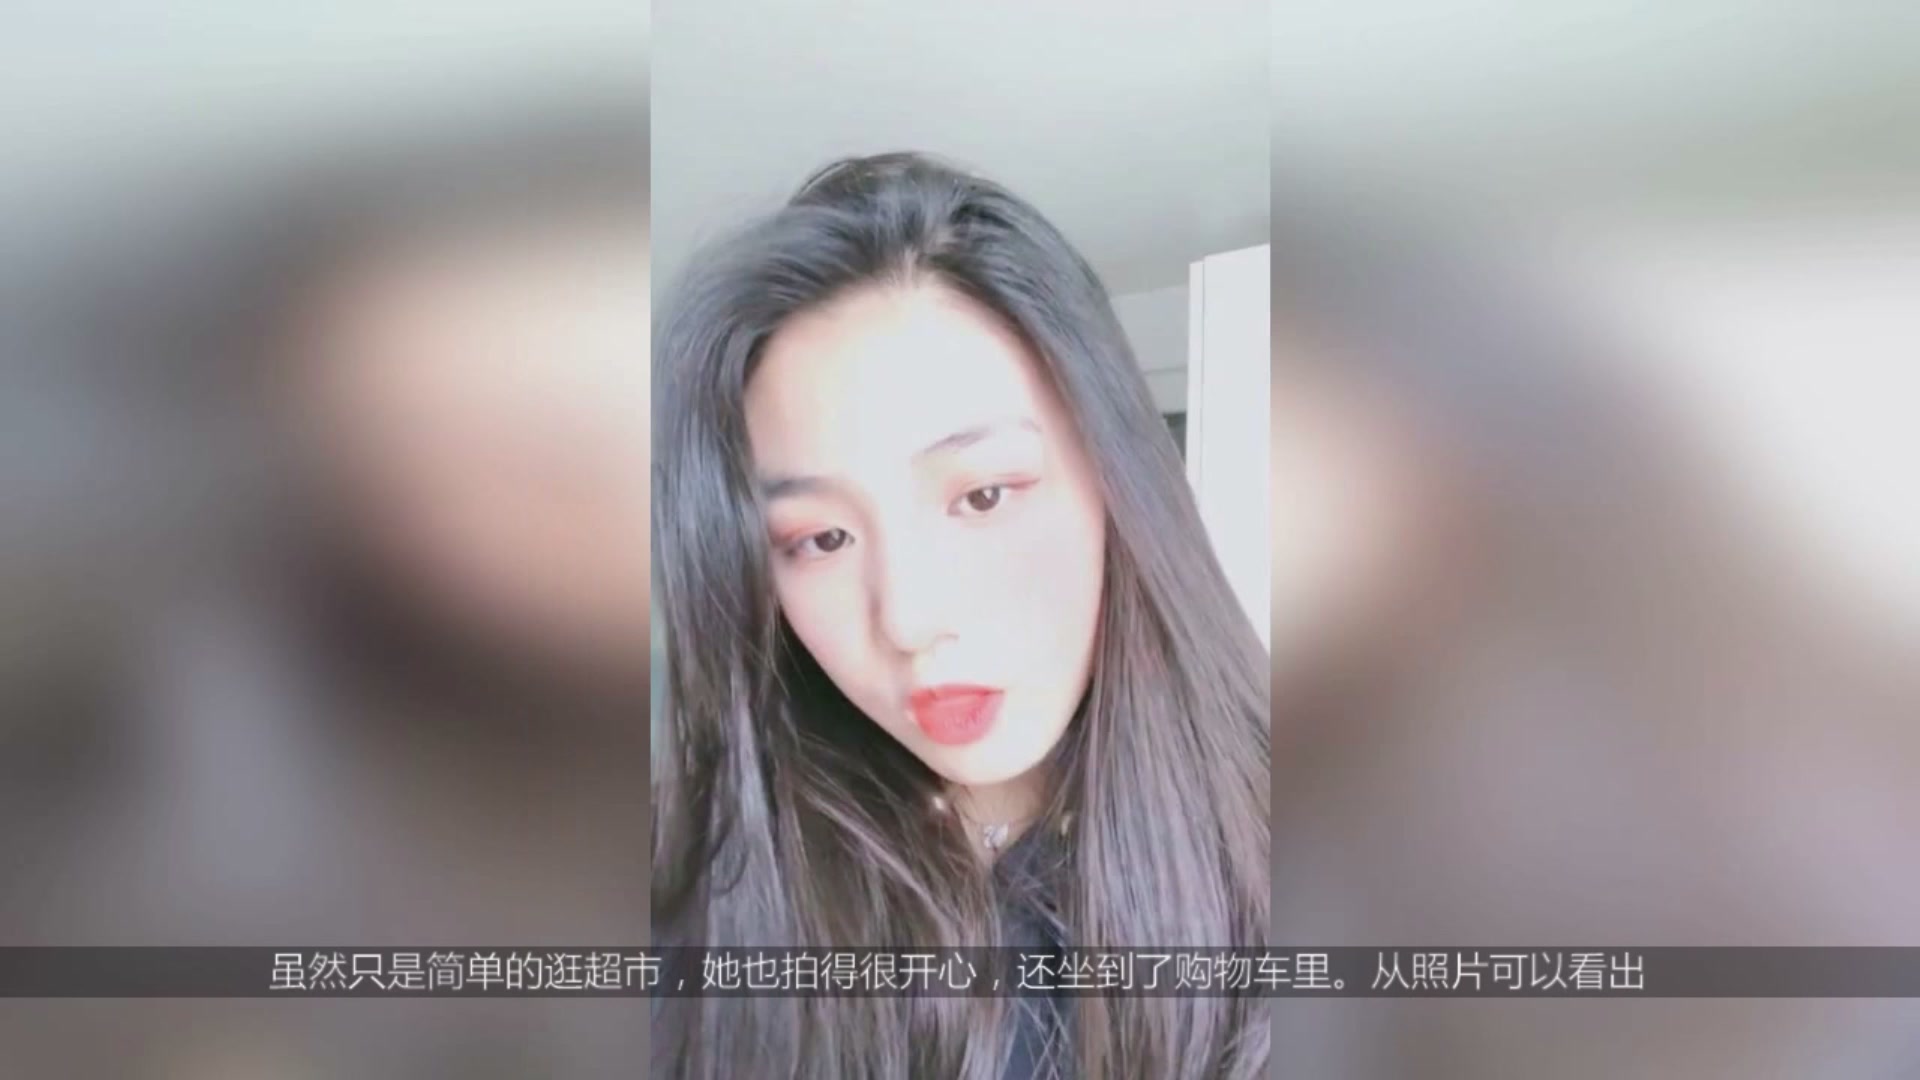 Wang Feng's 14-year-old daughter, Xiao Apple, has recently been photographed and exposed, which can be used in entertainment circles.